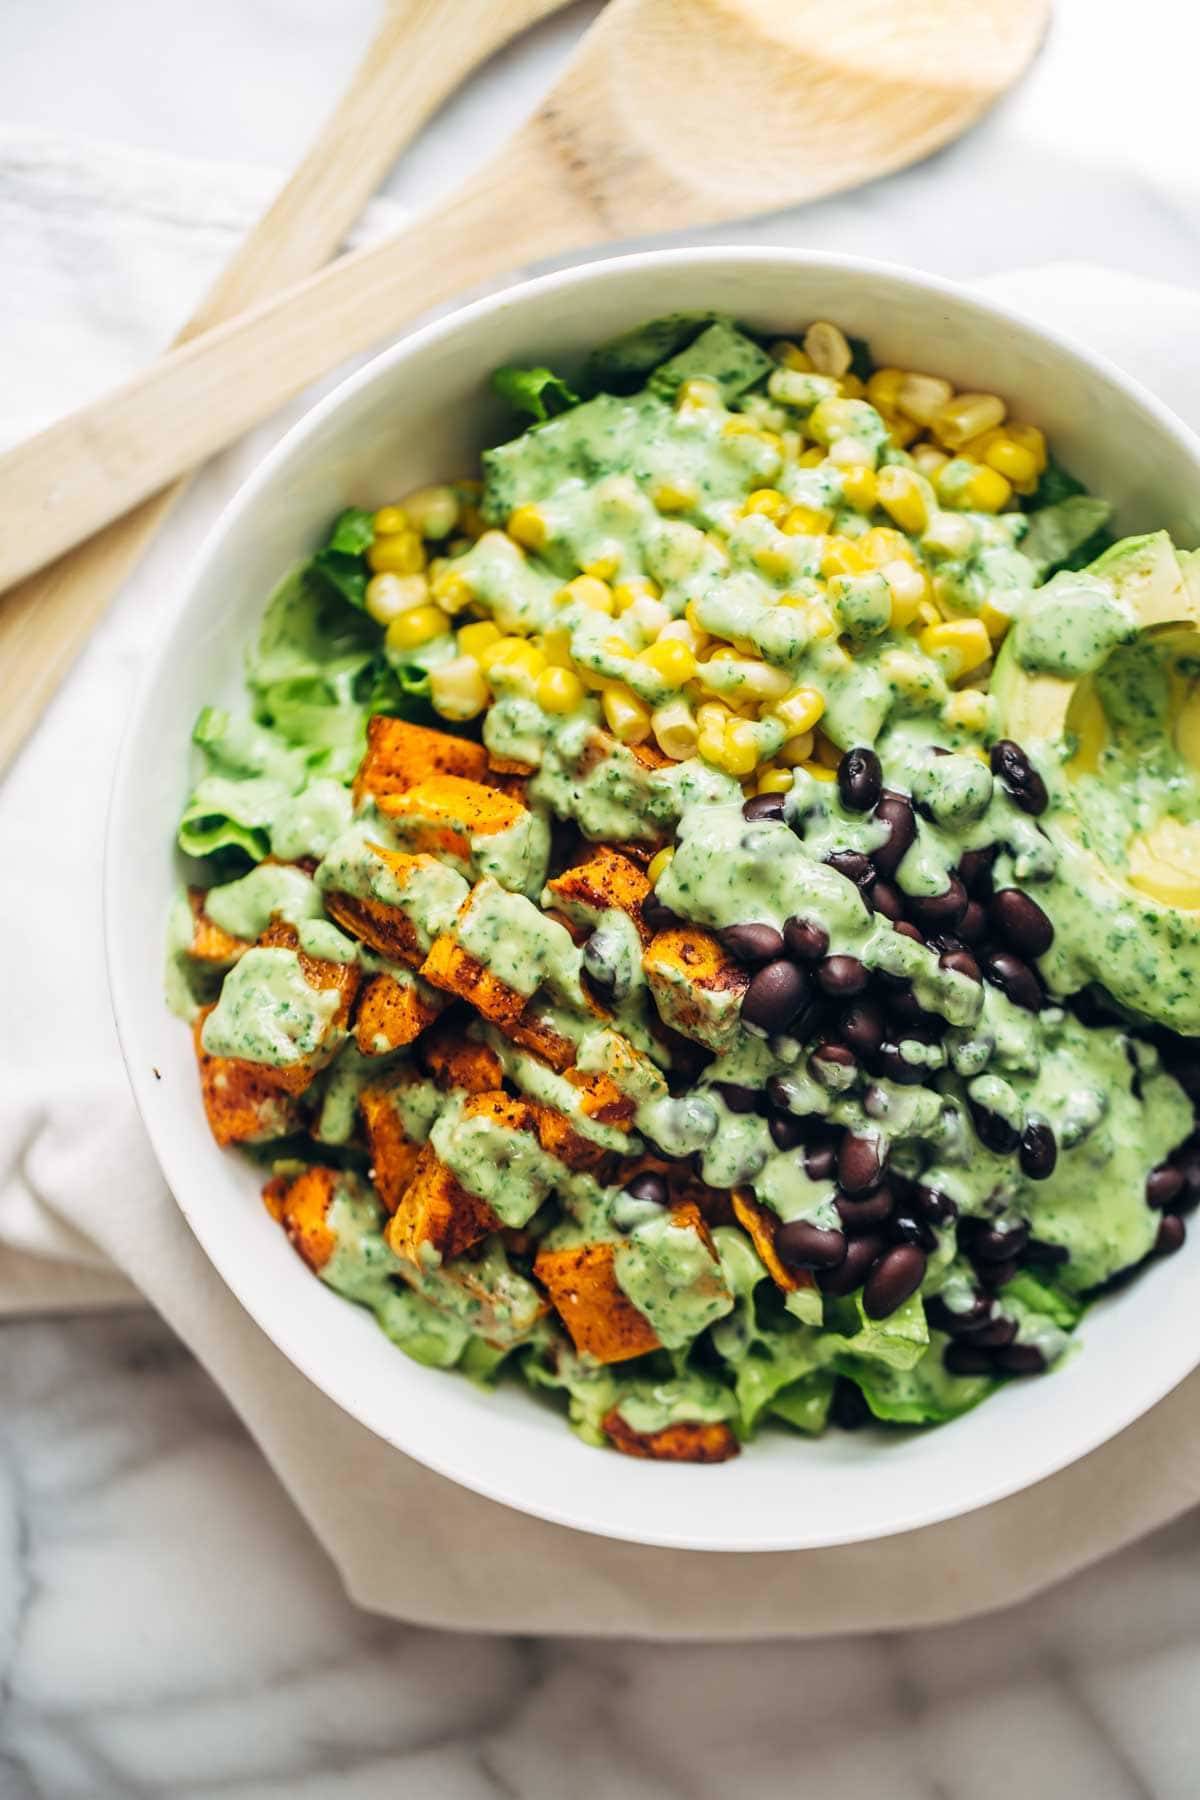 This healthy Spicy Southwestern Salad recipe has roasted sweet potatoes, black beans, corn, lettuce, and creamy avocado dressing! | pinchofyum.com